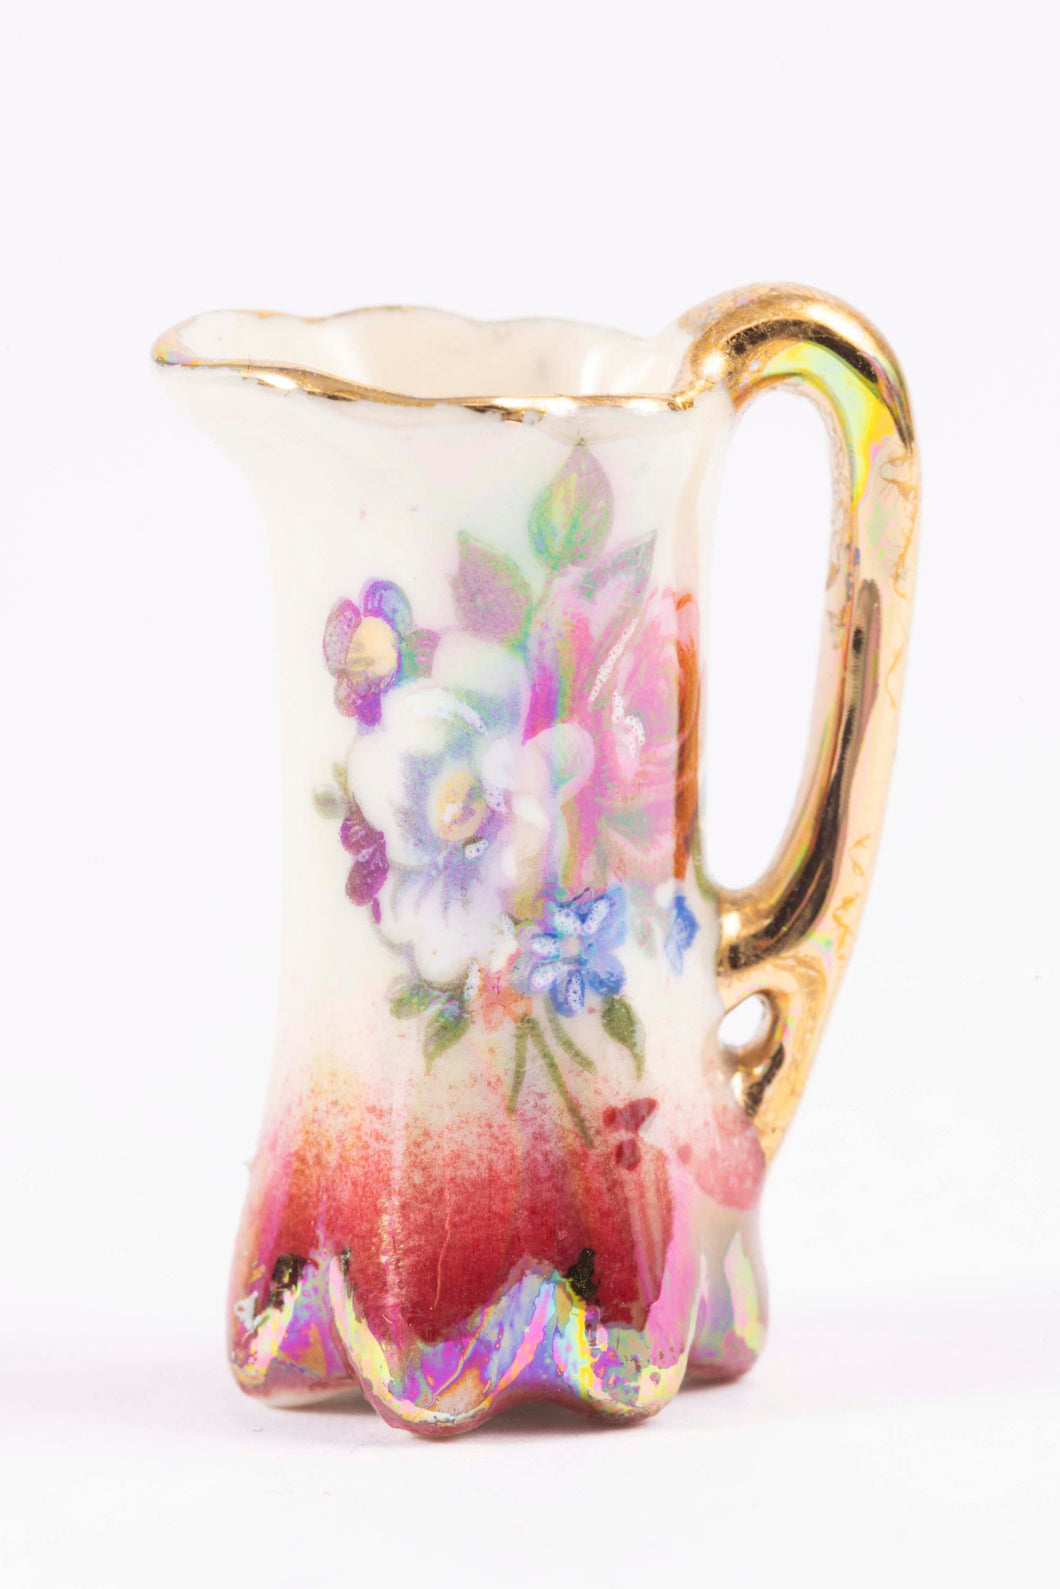 Dollhouse Miniature ~ Beautiful Vince Stapleton Pitcher with Flowers,  From Lee Lefkowitz Collection